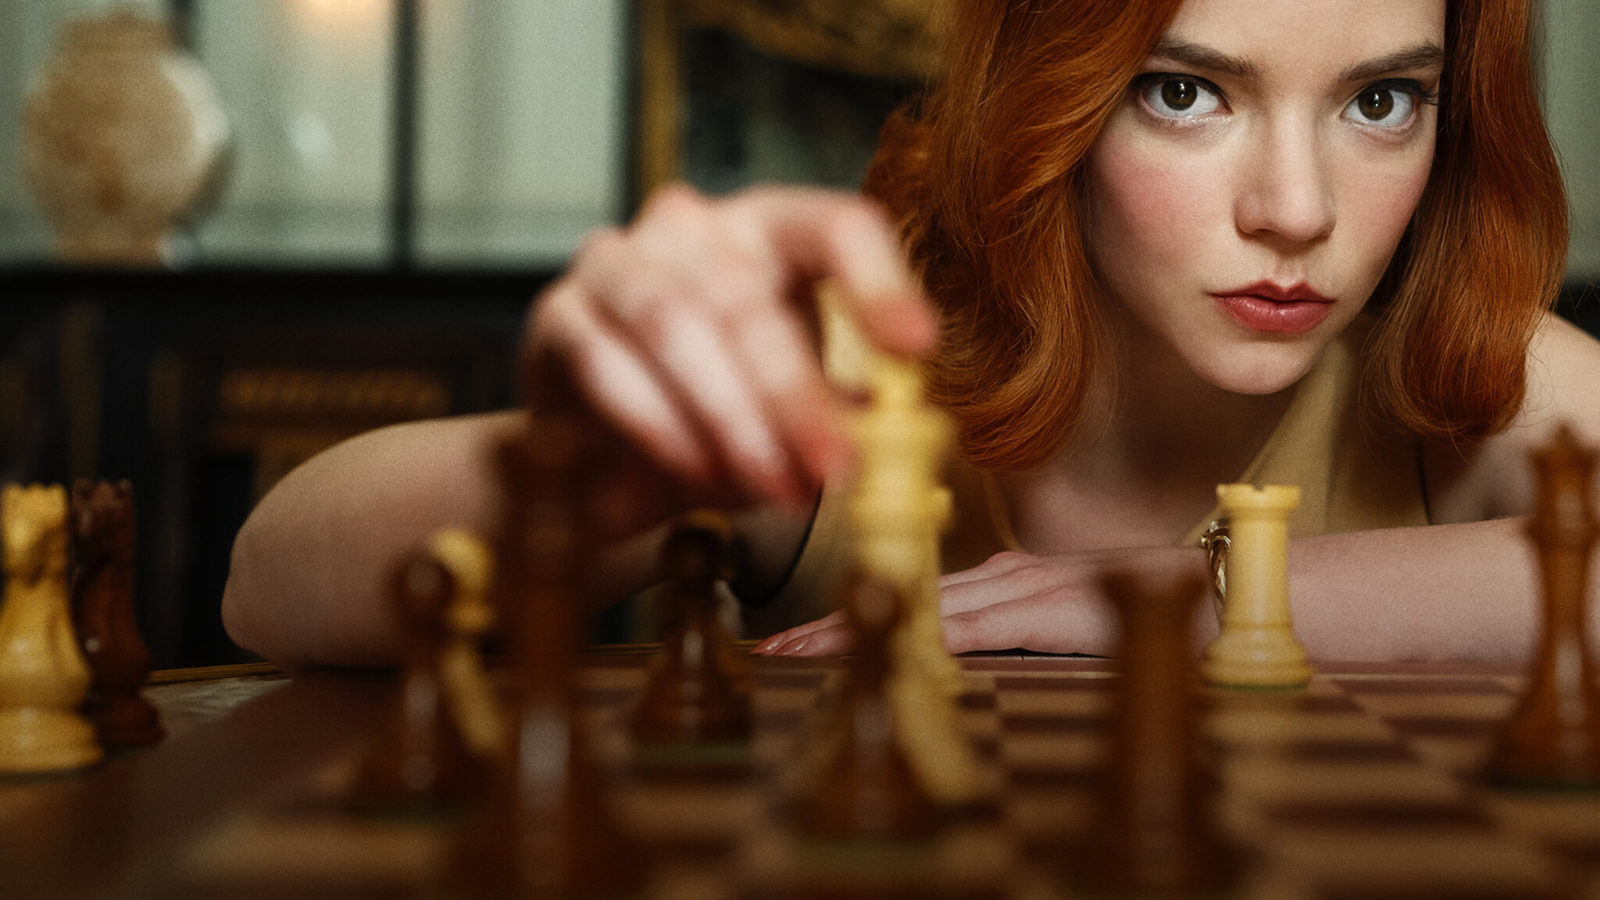 Will there be a second season of The Queen's Gambit on Netflix?